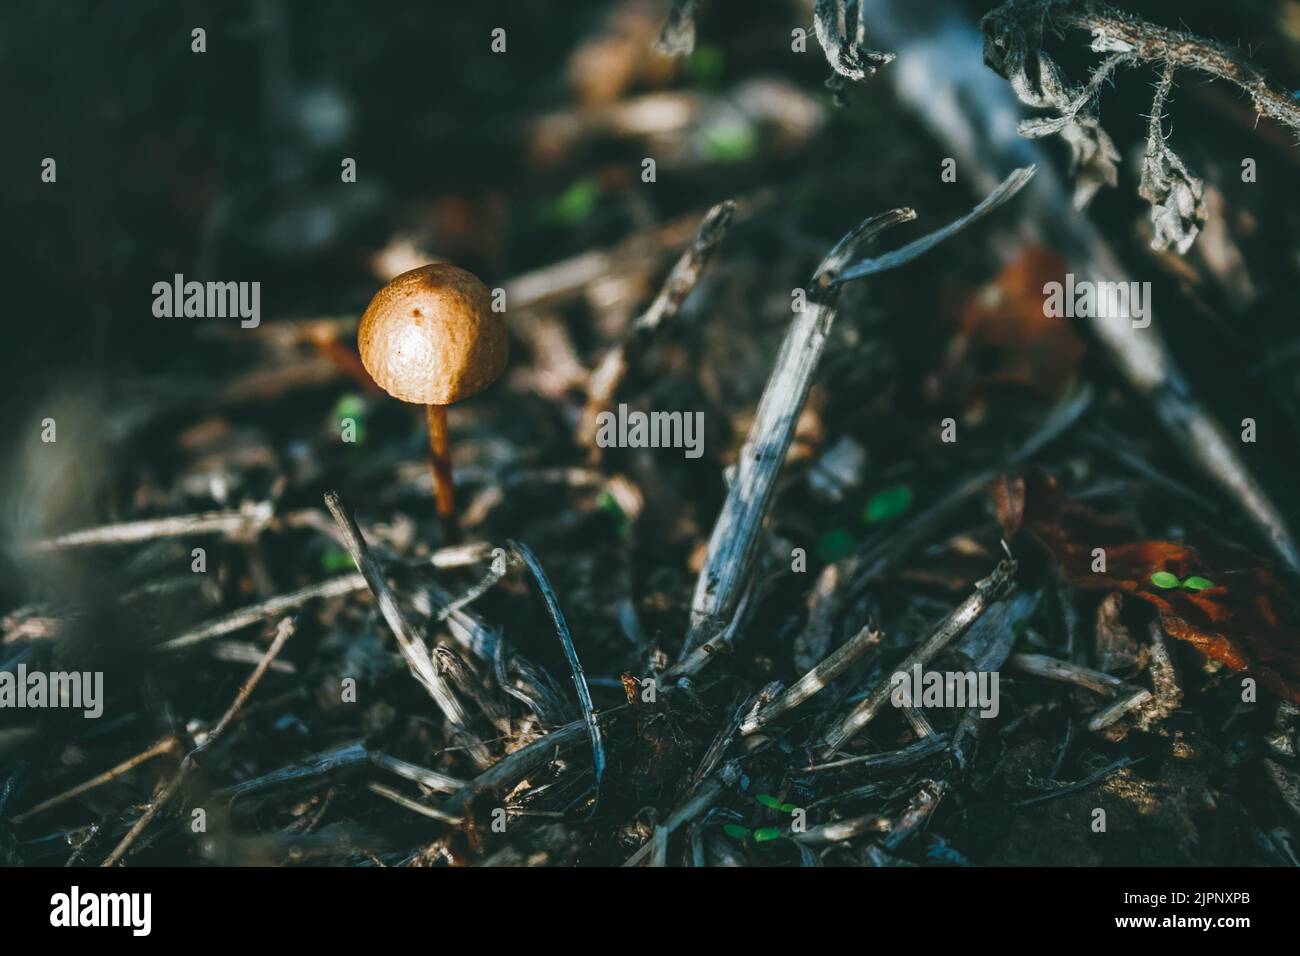 Beautiful small orange mushroom among dried branches, foliage, mowed grass in mystical autumn misty forest. Selective focus Stock Photo